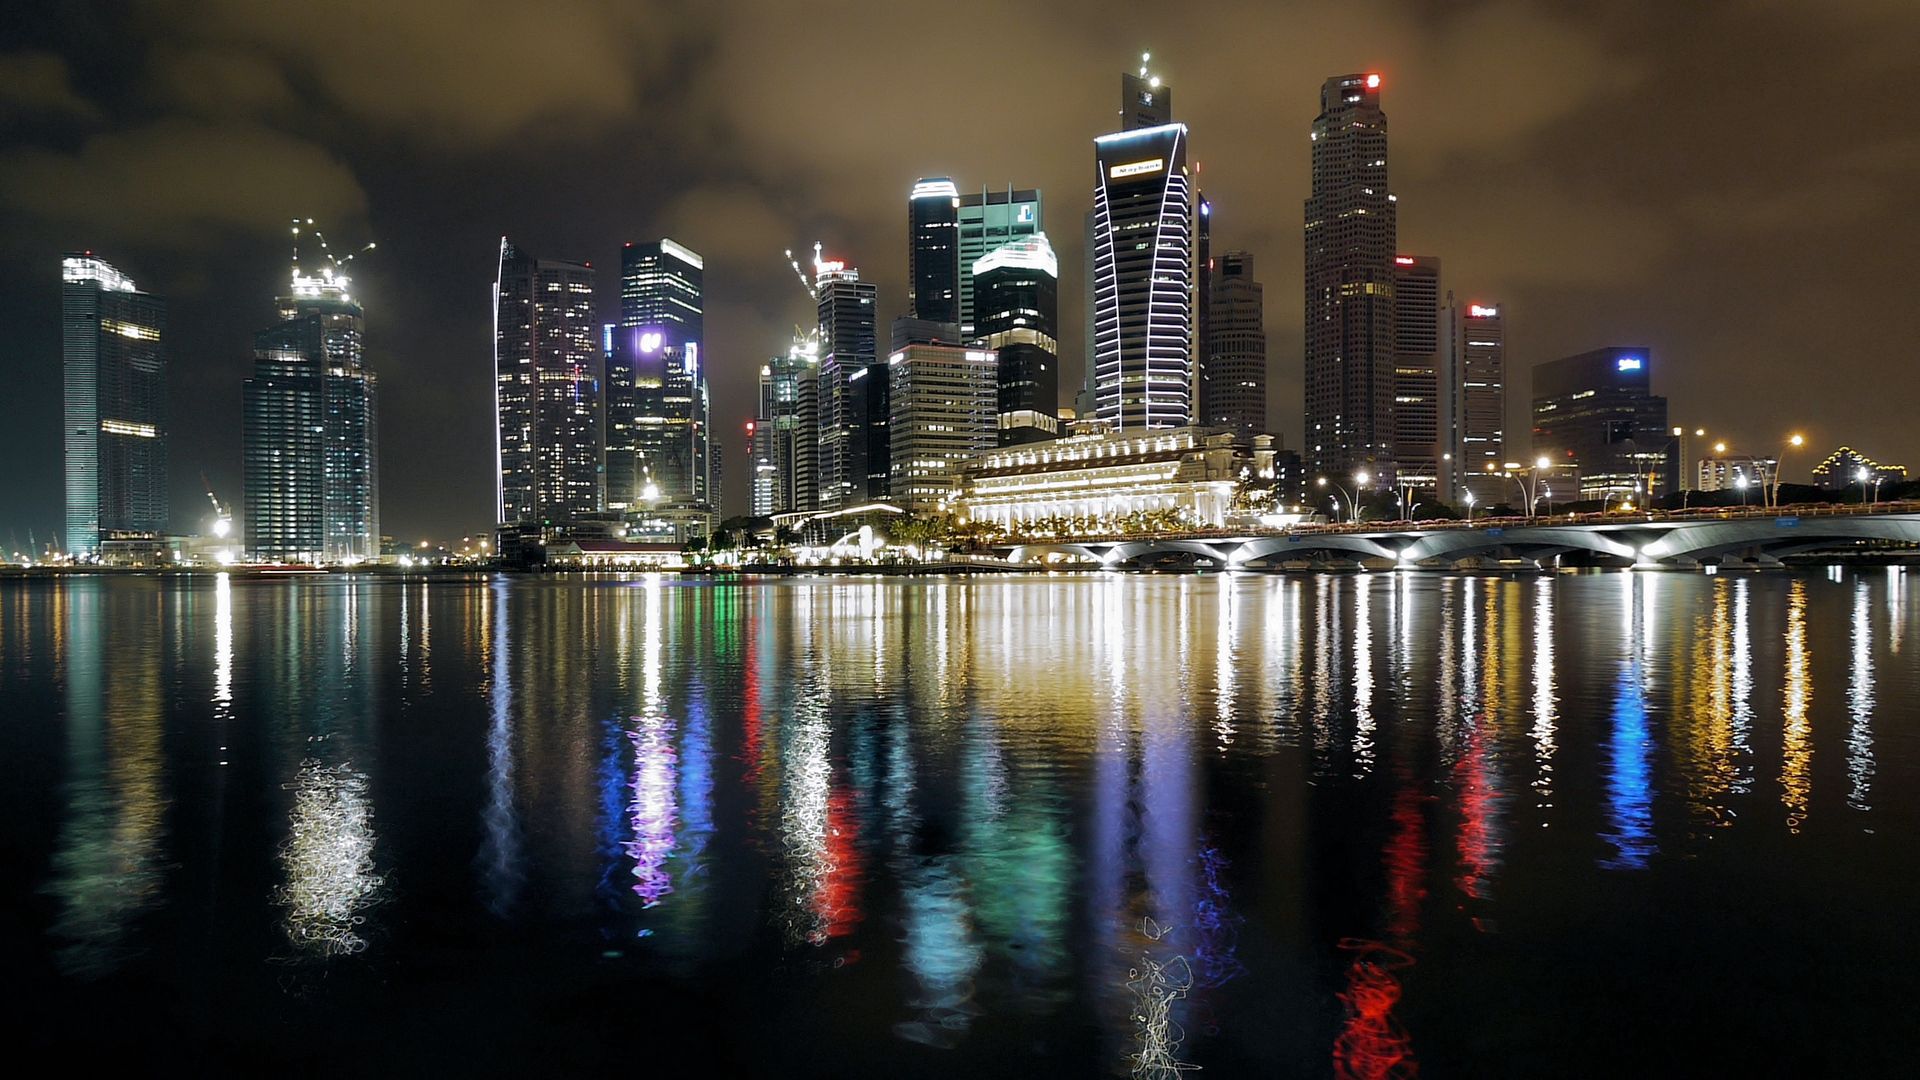 reflection, colorful, cities, night, building, colourful, singapore